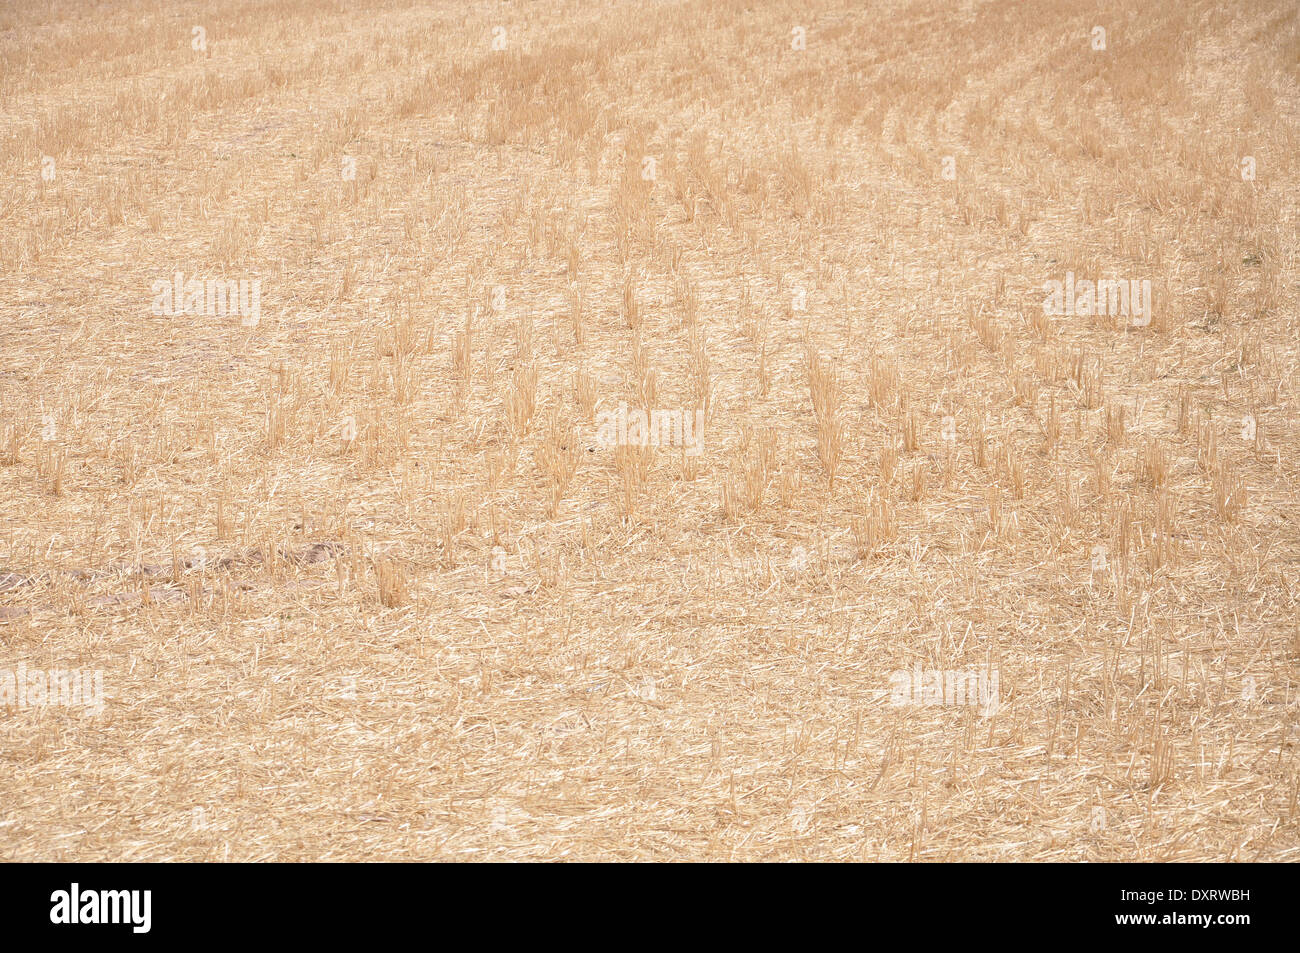 A field of cereal after the harvest Stock Photo